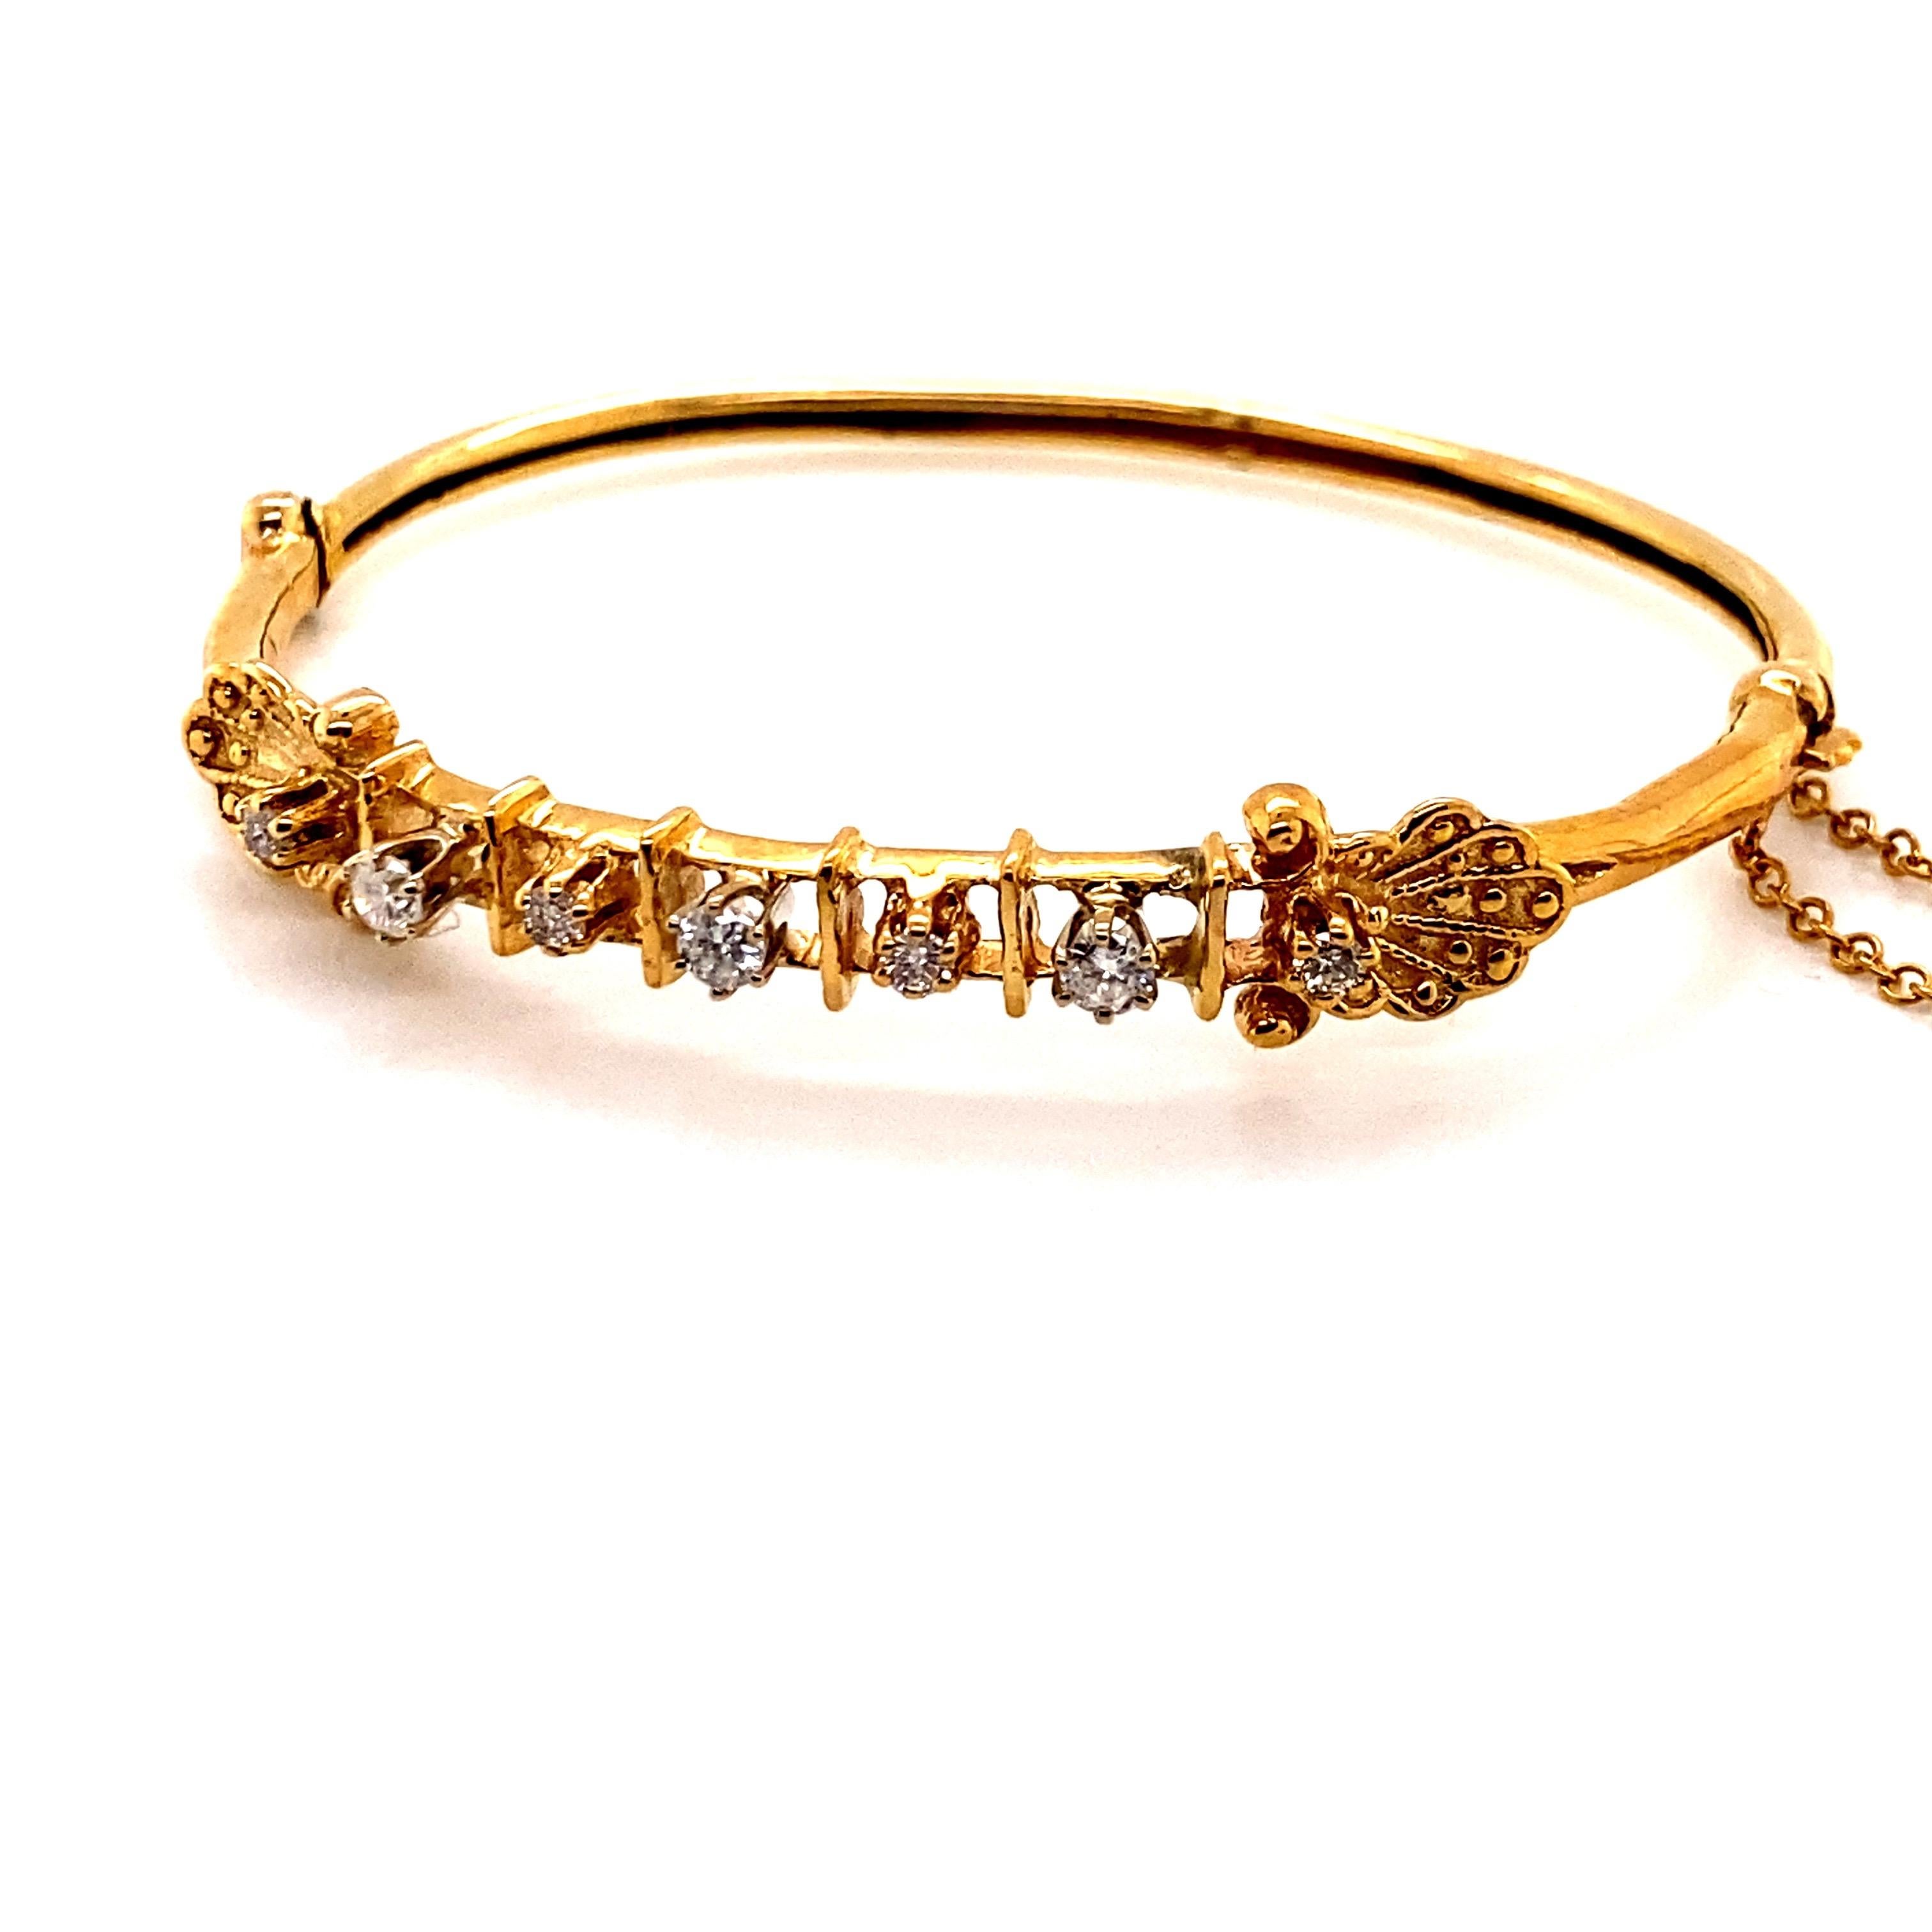 Vintage 14K Yellow Gold Victorian Reproduction Diamond Bangle Bracelet - The bangle contains 7 round diamonds weighing approximately .45ct with G - H color and I1 clarity. The bracelet tube width is 3mm. The inside diameter is 2 inches high by 2.25